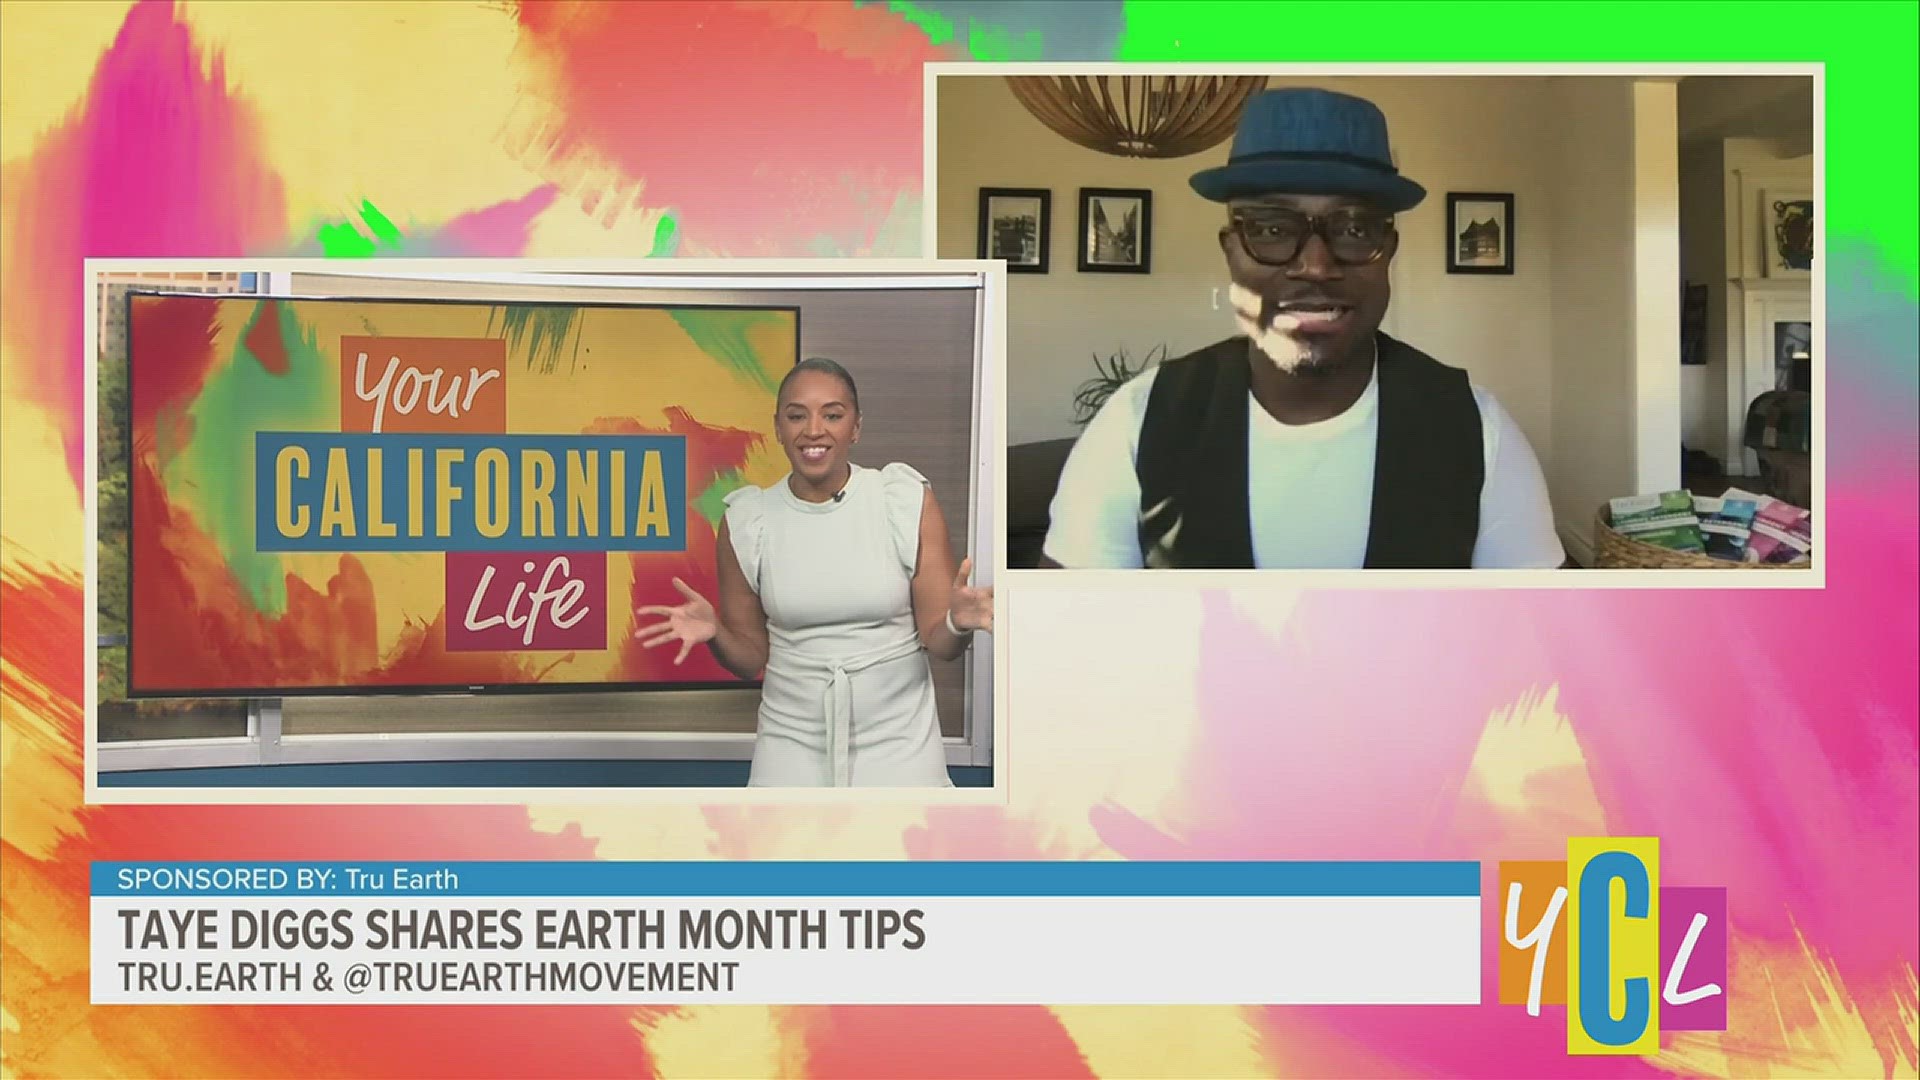 Film, TV and Broadway star Taye Diggs shares simple tips and insights on how we can be more environmentally friendly. Sponsored by Tru Earth.